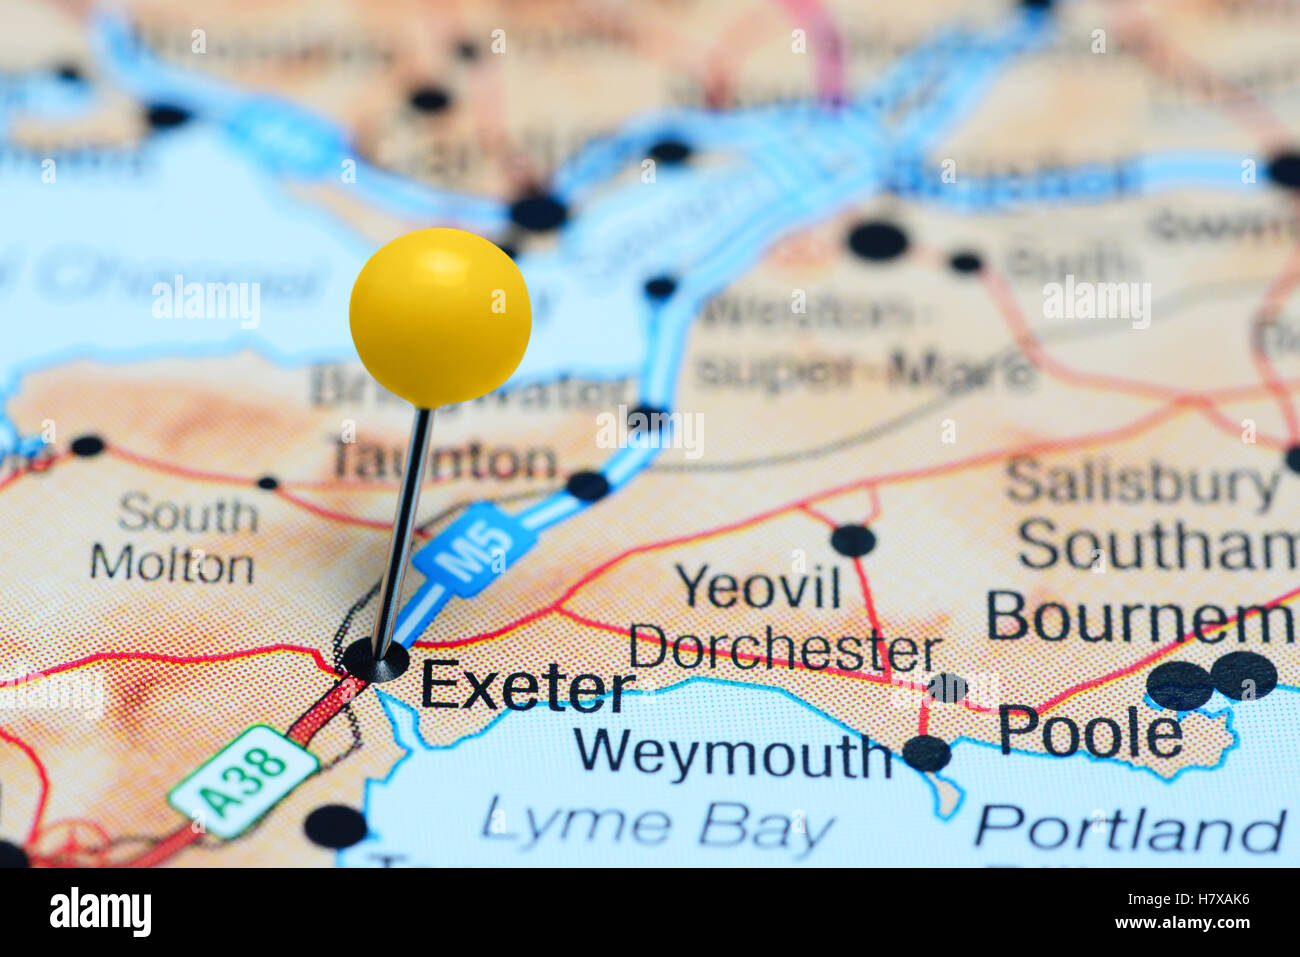 Exeter pinned on a map of UK Stock Photo